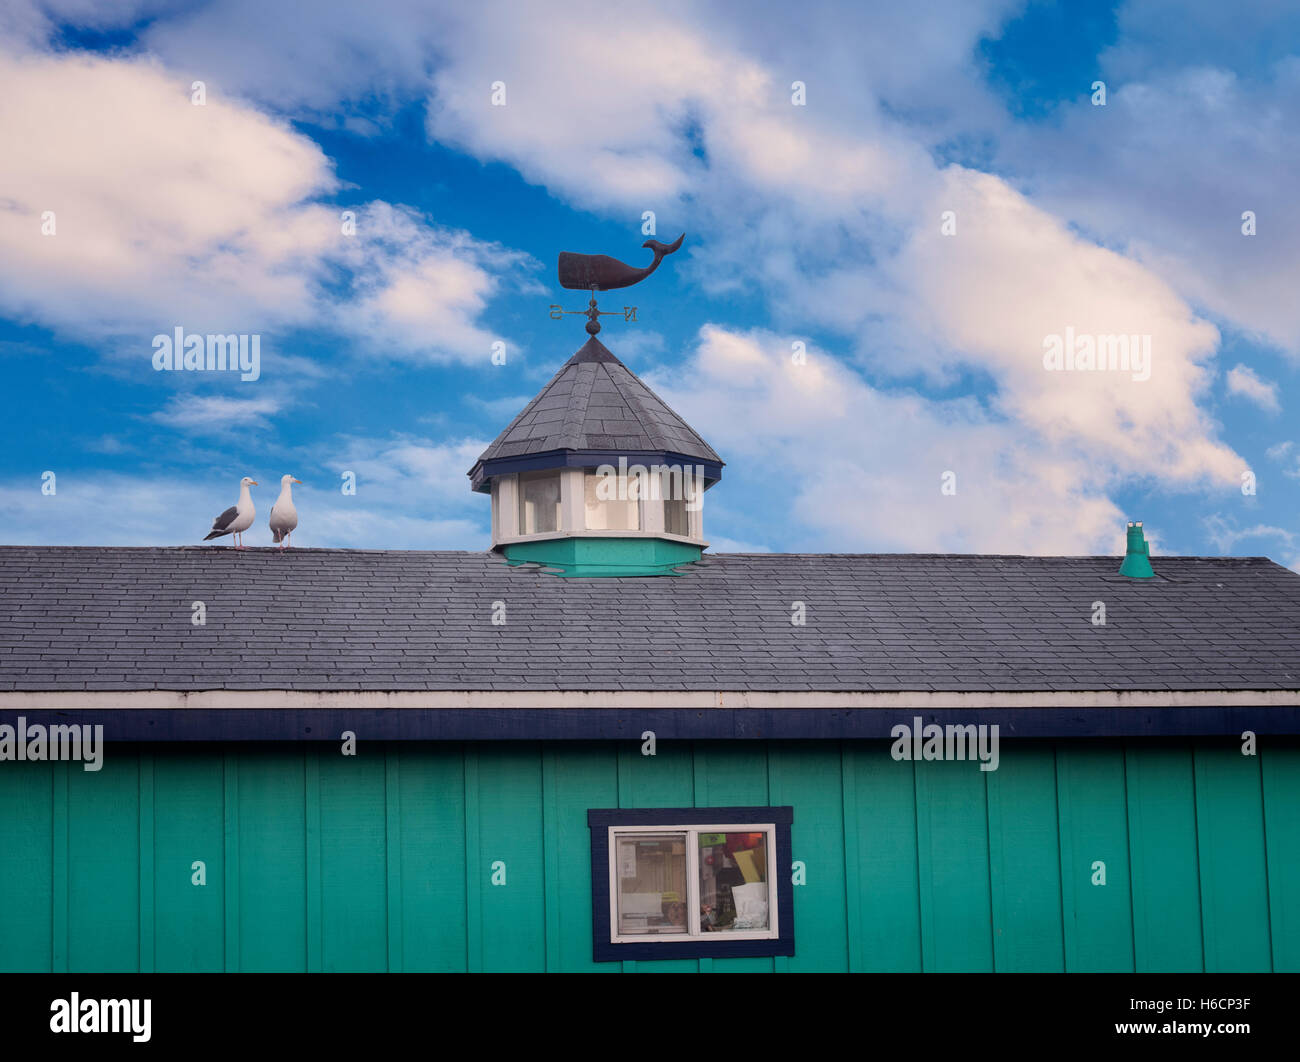 Seagulls on roof top with whale weather vain. Fisherman's Wharf. Monterey, California Stock Photo